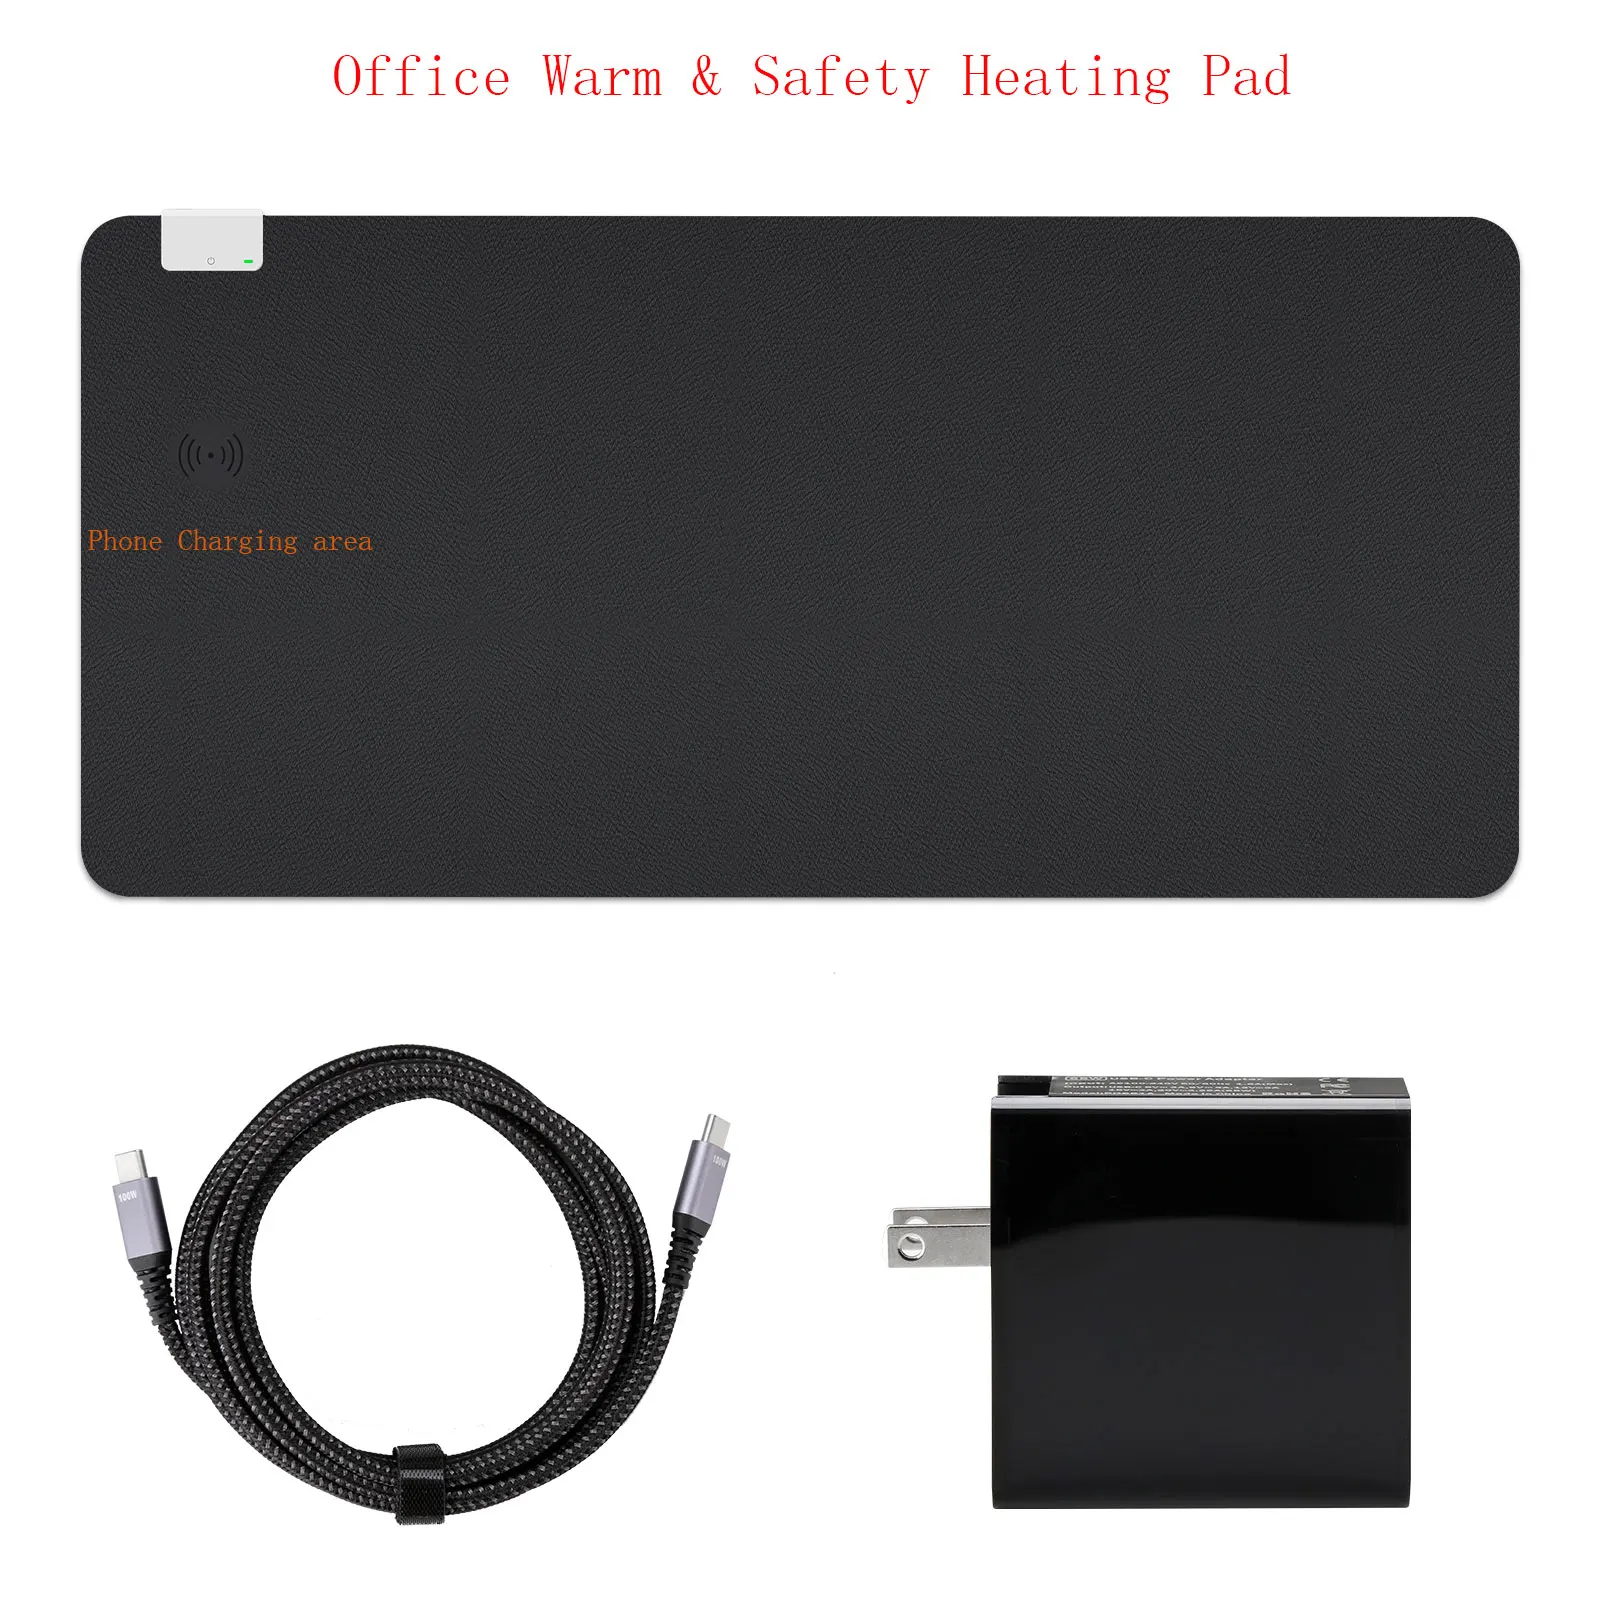 KINGFOM Office Desk Mat with Mobile Phone Wireless Charging Function PU Leather Mouse Pad Winter Heating Thermostatic Table Mat